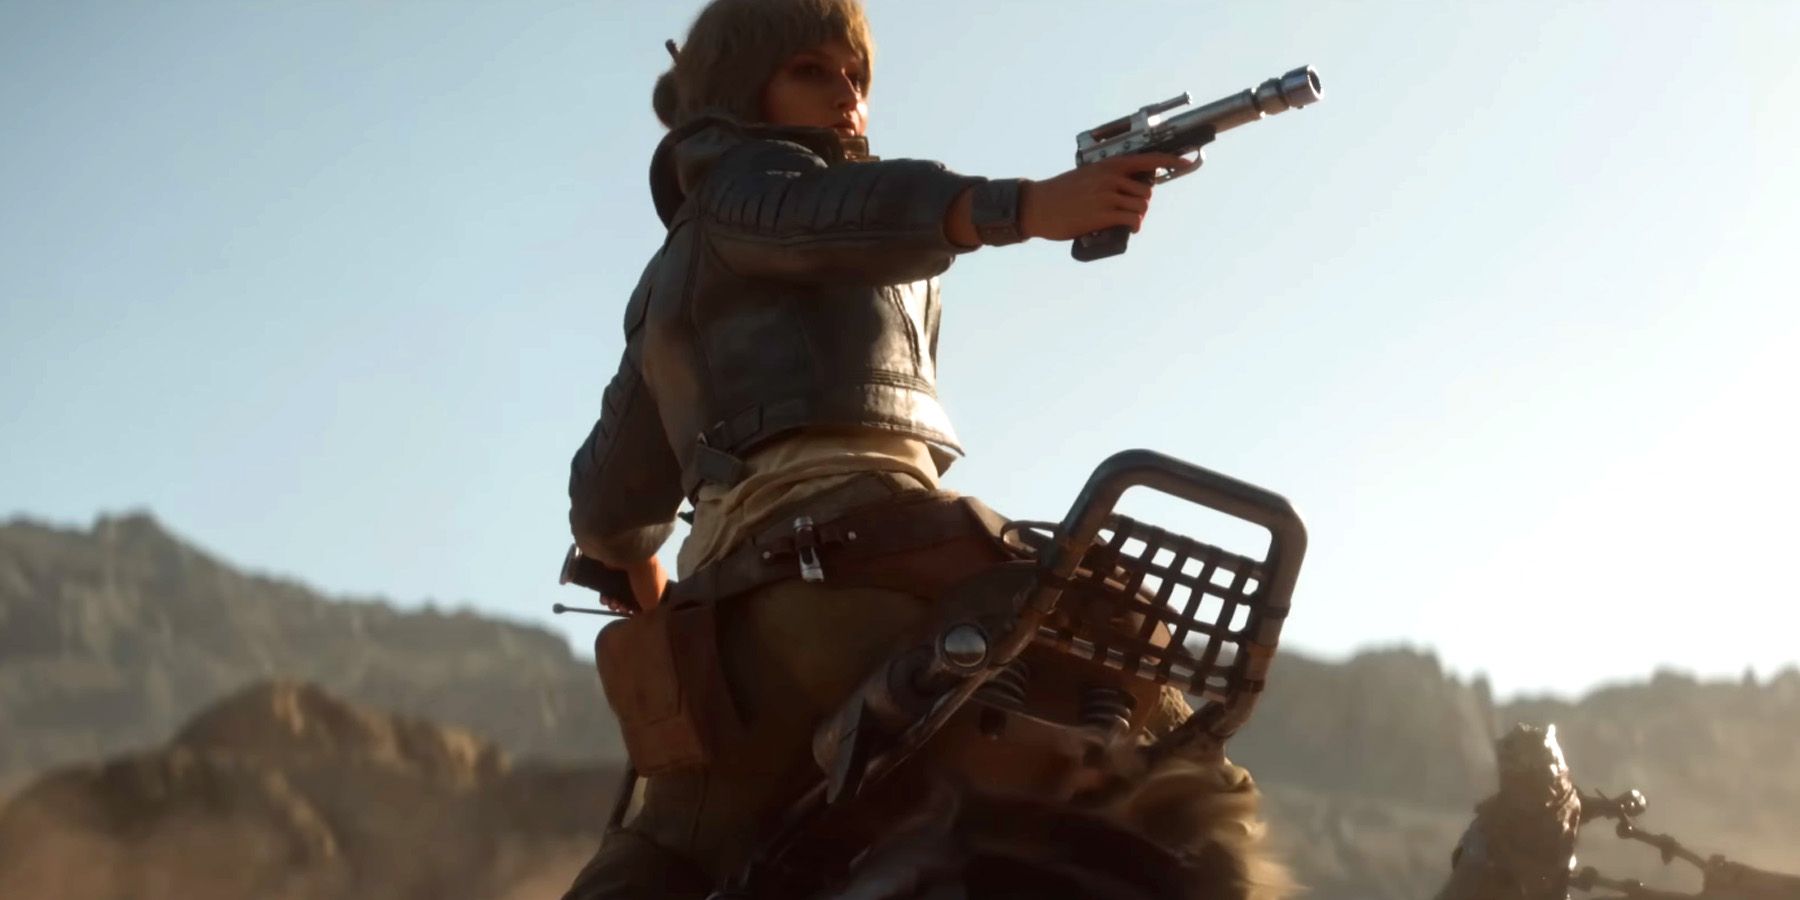 Star Wars Outlaws protagonist Kay brandishing a blaster as she looks back on top of a speeder bike.